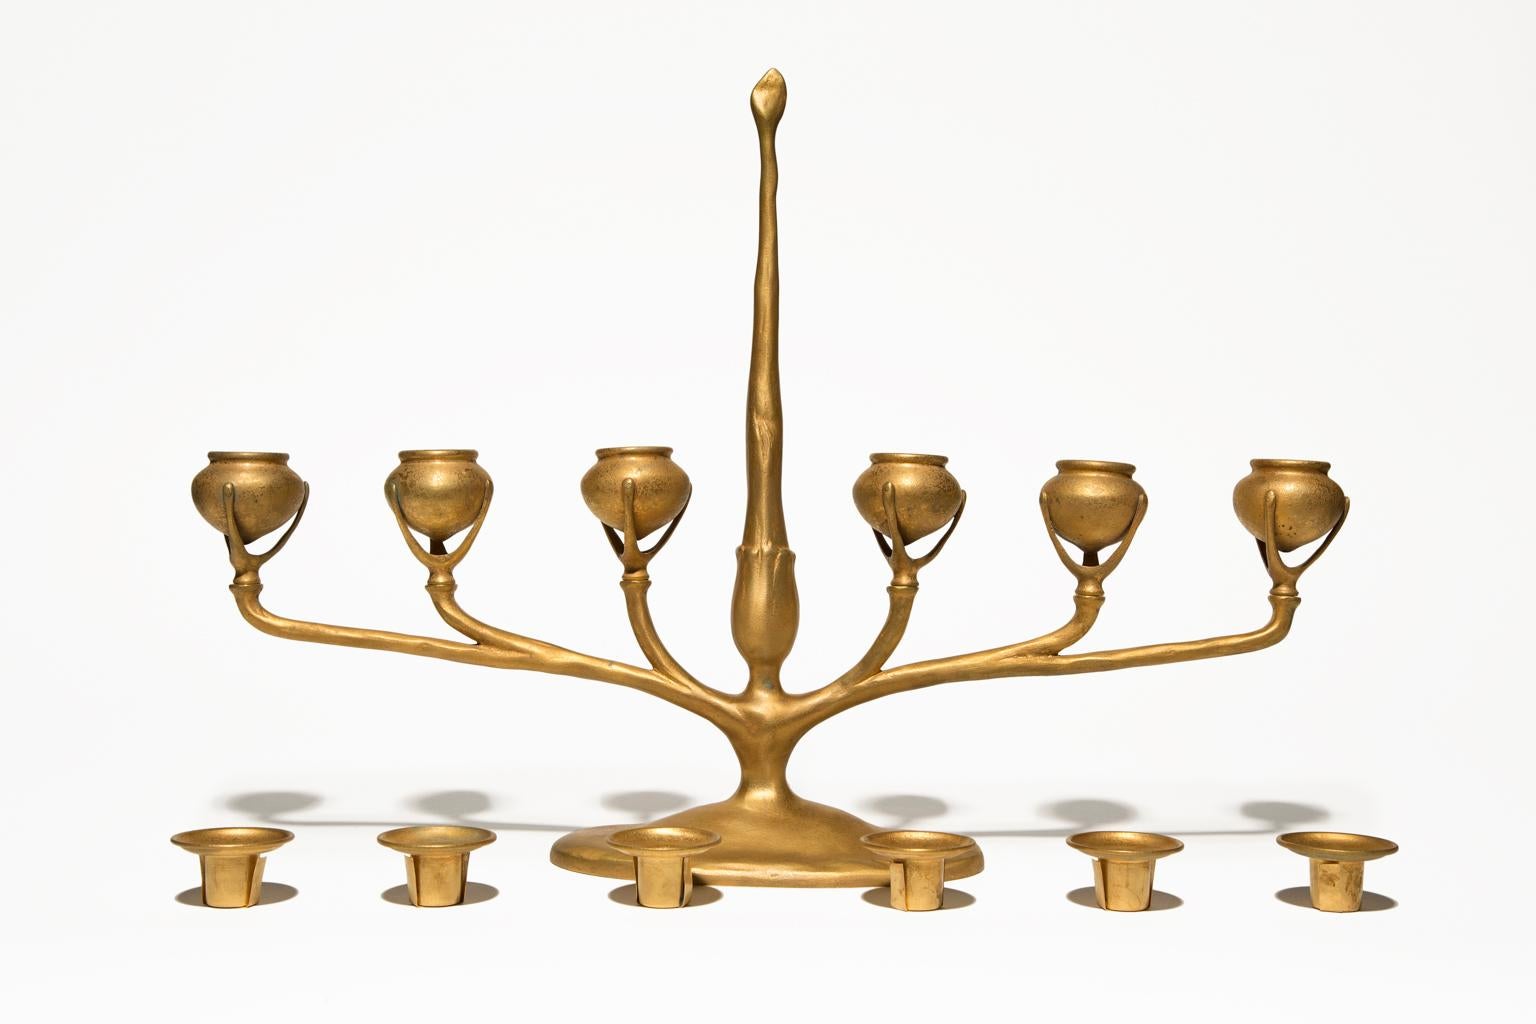 This exquisite antique is a Tiffany Studios gilted bronze candelabra from the early 20th century. It features six arms for candle cups and a center piece that rises above it like a spire. The candle cups are urn form cups and are outfitted with